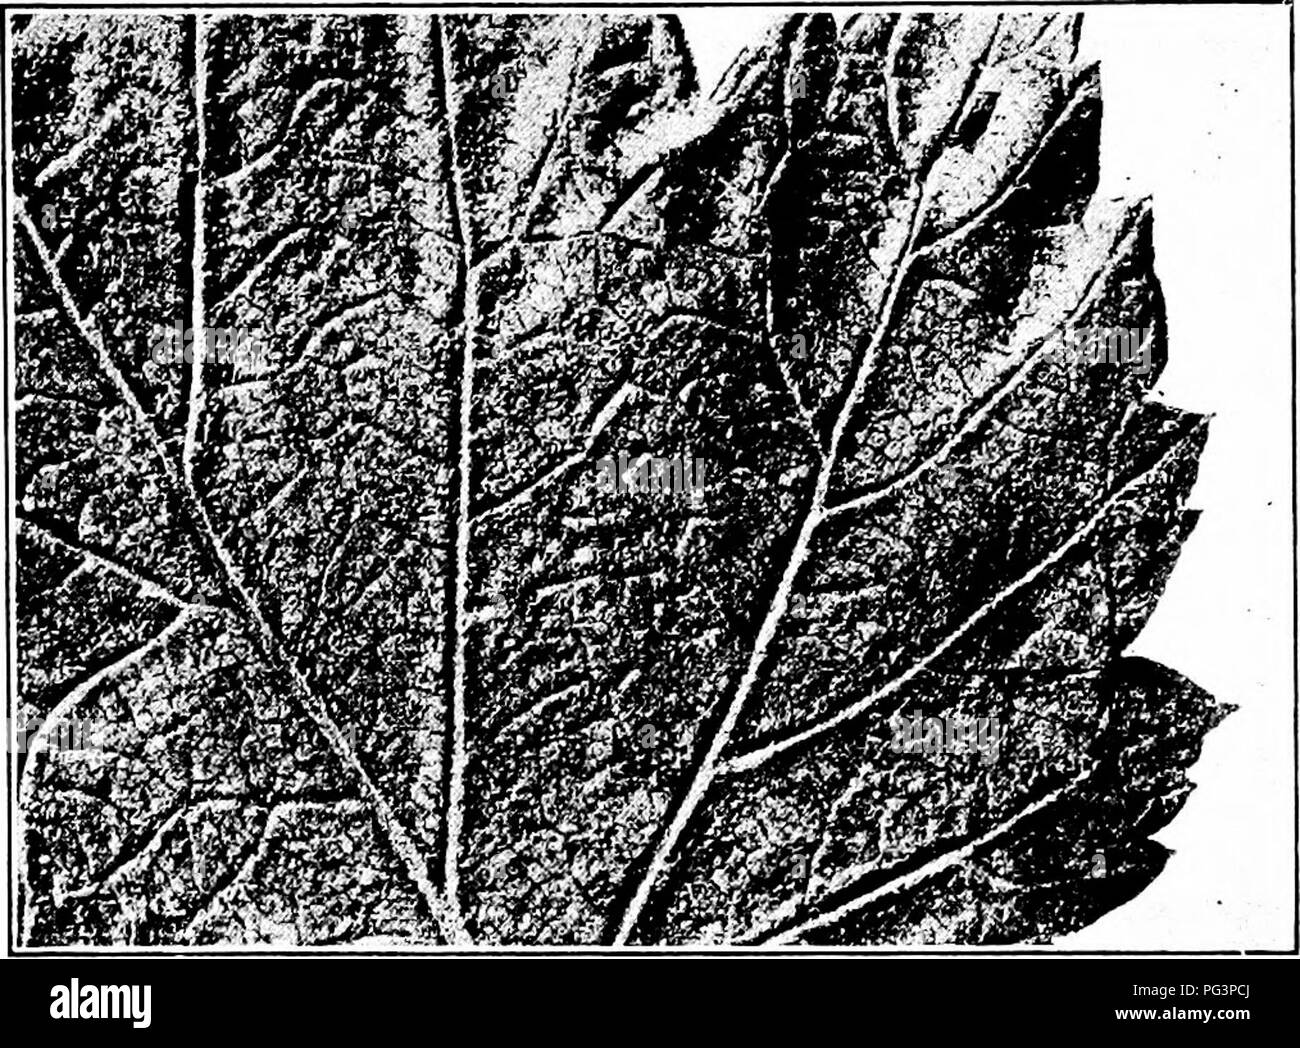 . Manual of fruit diseases . Fruit. 214 MANUAL OF FRUIT DISEASES The disease may first be observed on the white pine (Fig. 57) in the spring from April to early June. The stem or branches are often girdled and the portion above dies. Most young trees die in a relatively short time; others live for some time, but even old stems fuially succumb, the tree eventually break- ing at the lesion. The disease in its early stages shows peculiar. Fig. 5.5. — European currant-rust; uredinia on lower surface of black currant leaf. fusiform, or spindle-shaped, swellings which taper upward. These are usually Stock Photo